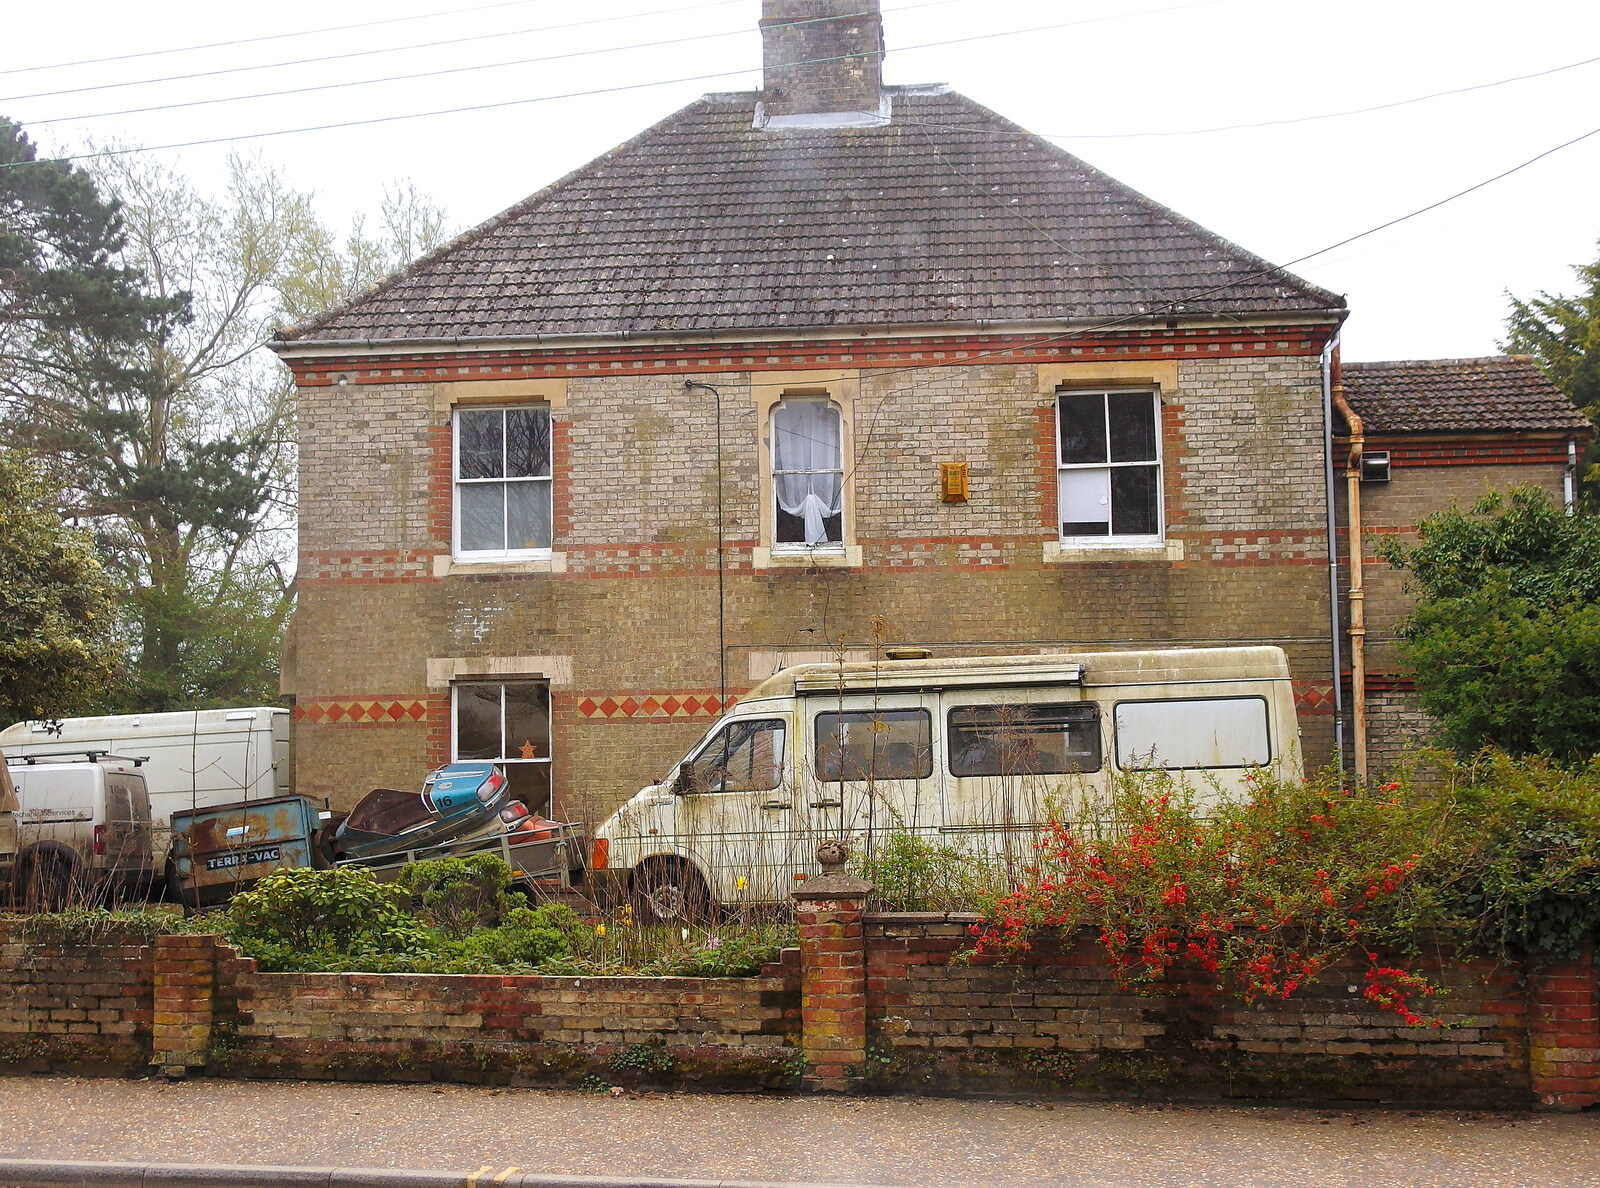 A derelict-but-lived in house near Gaze's from A Trainey Sort of Week, Liverpool Street, City of London - 3rd April 2014